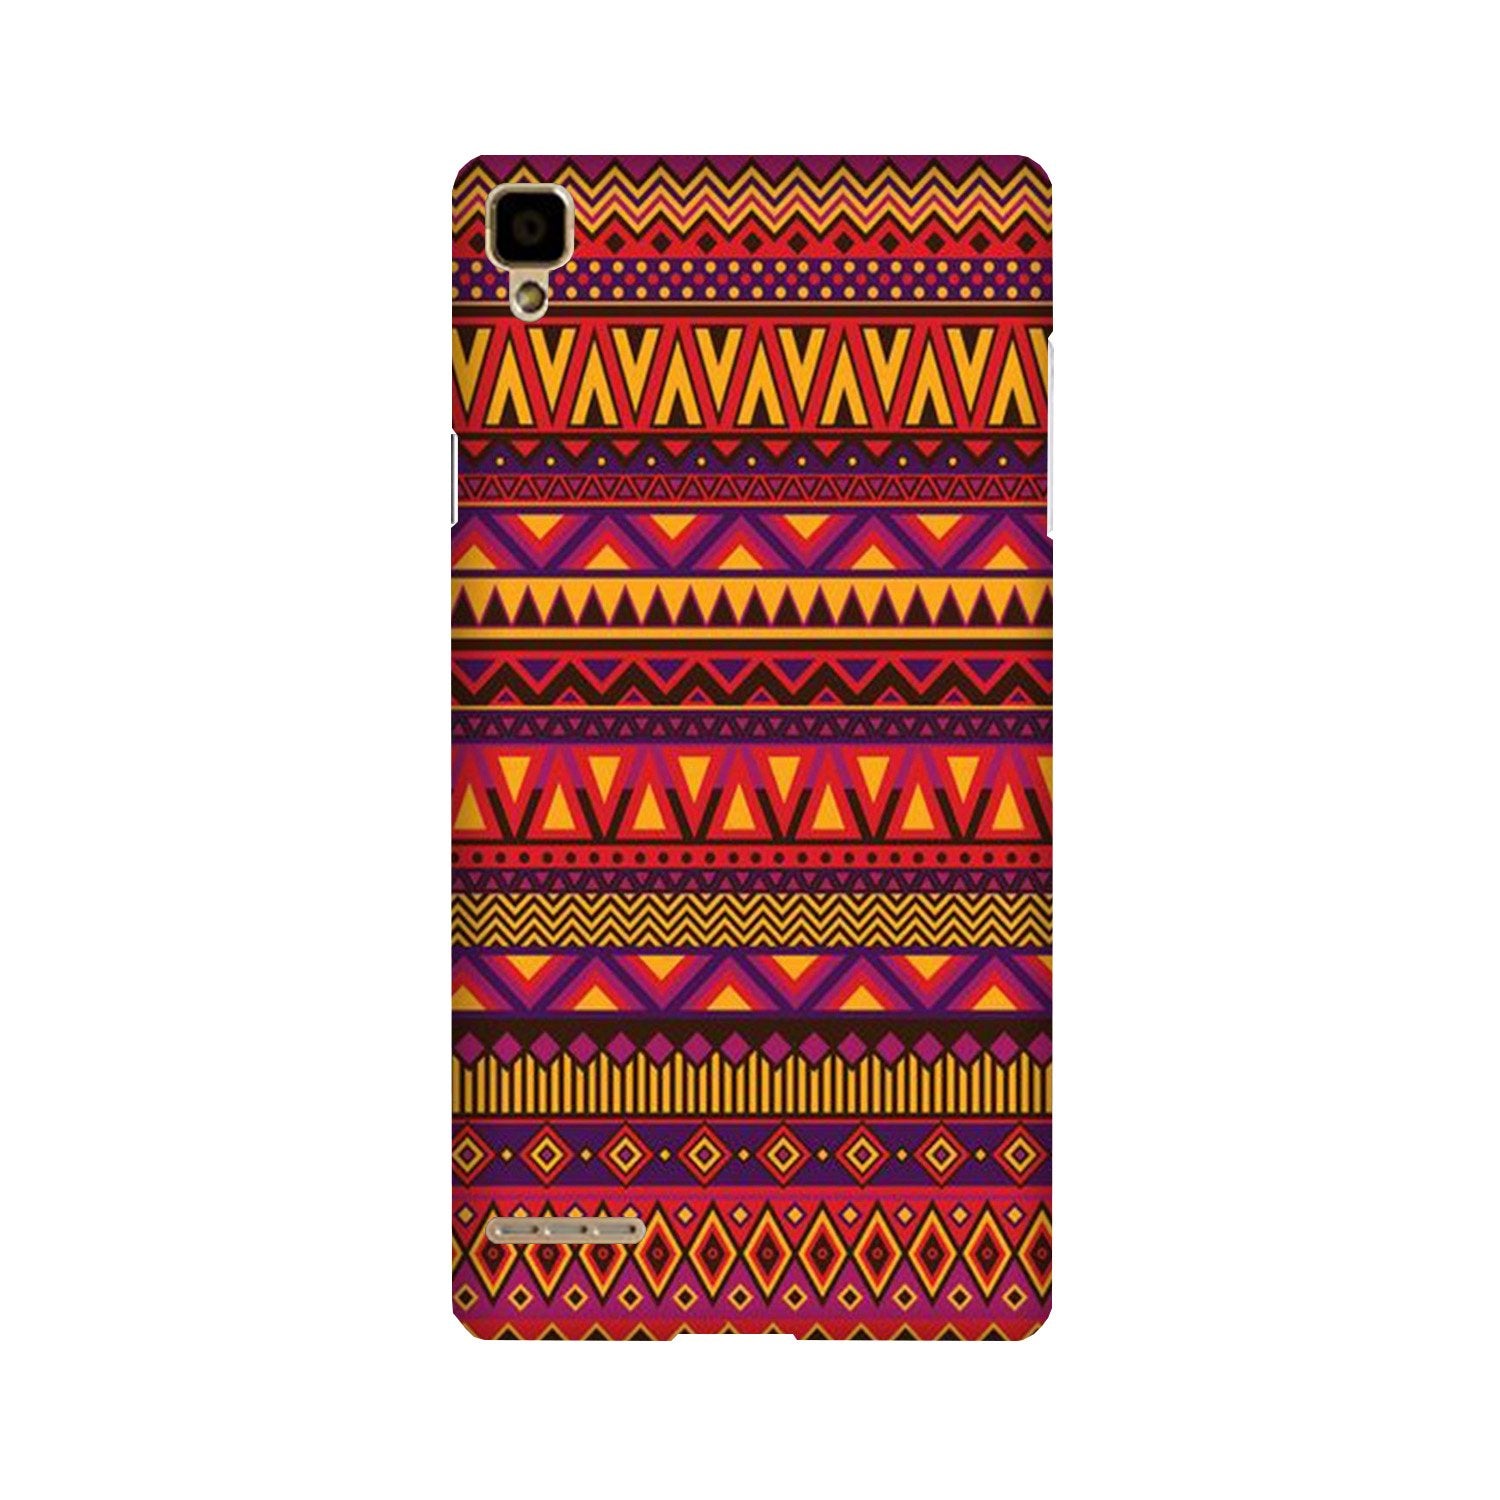 Zigzag line pattern2 Case for Oppo F1